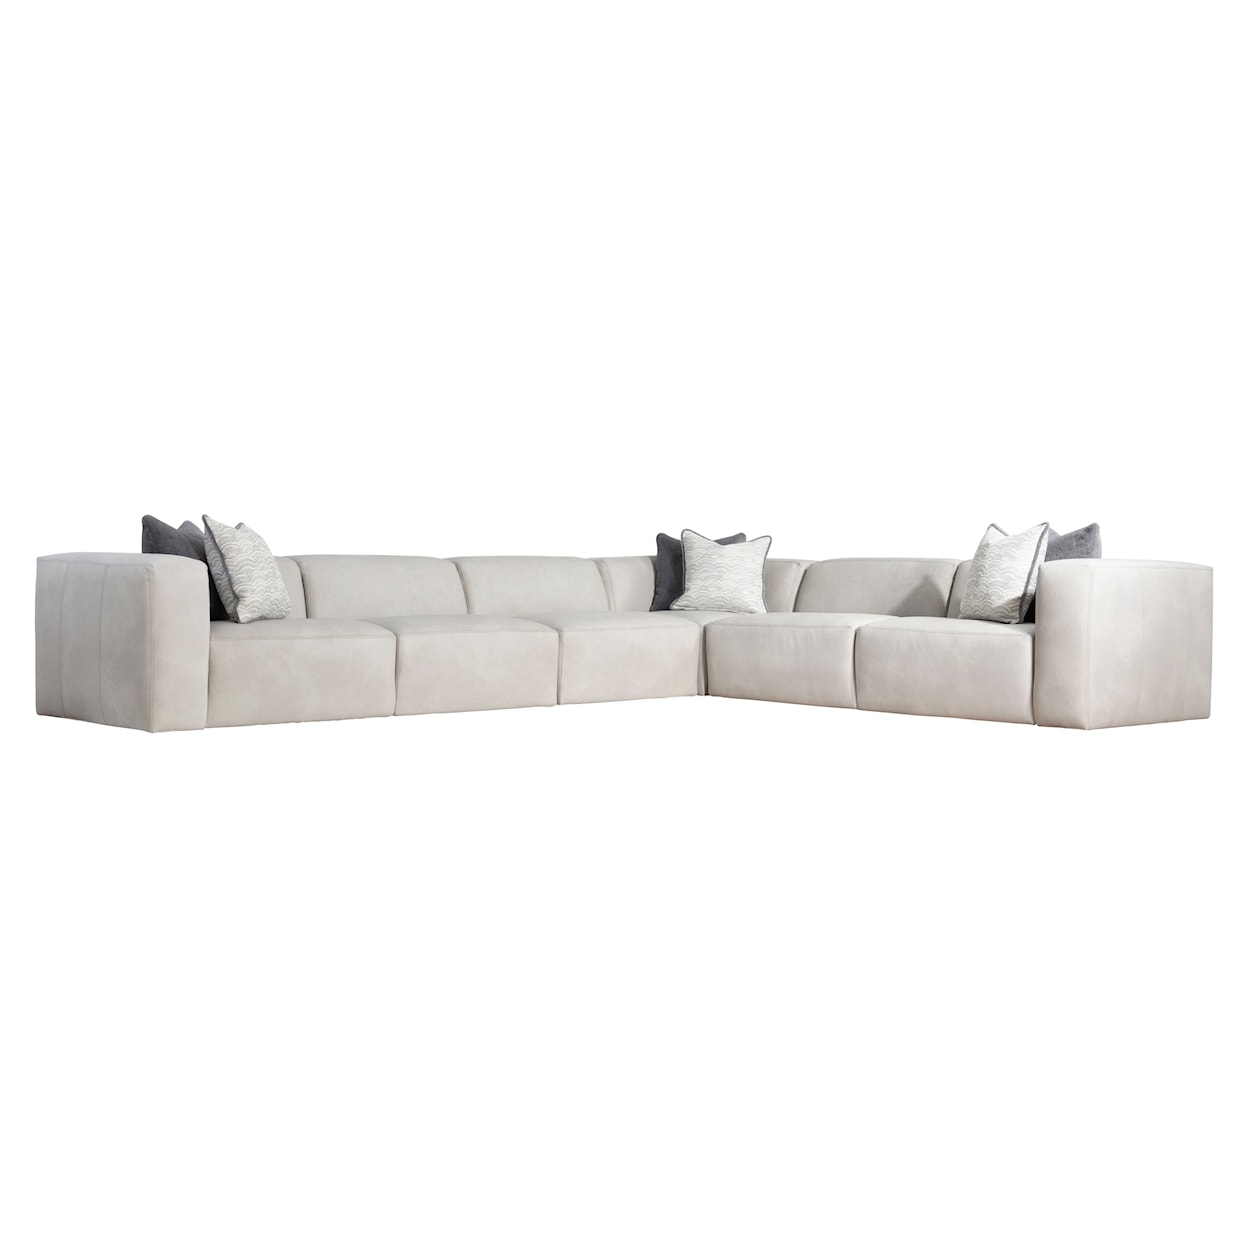 Bernhardt Bliss 4-Piece Leather Sectional